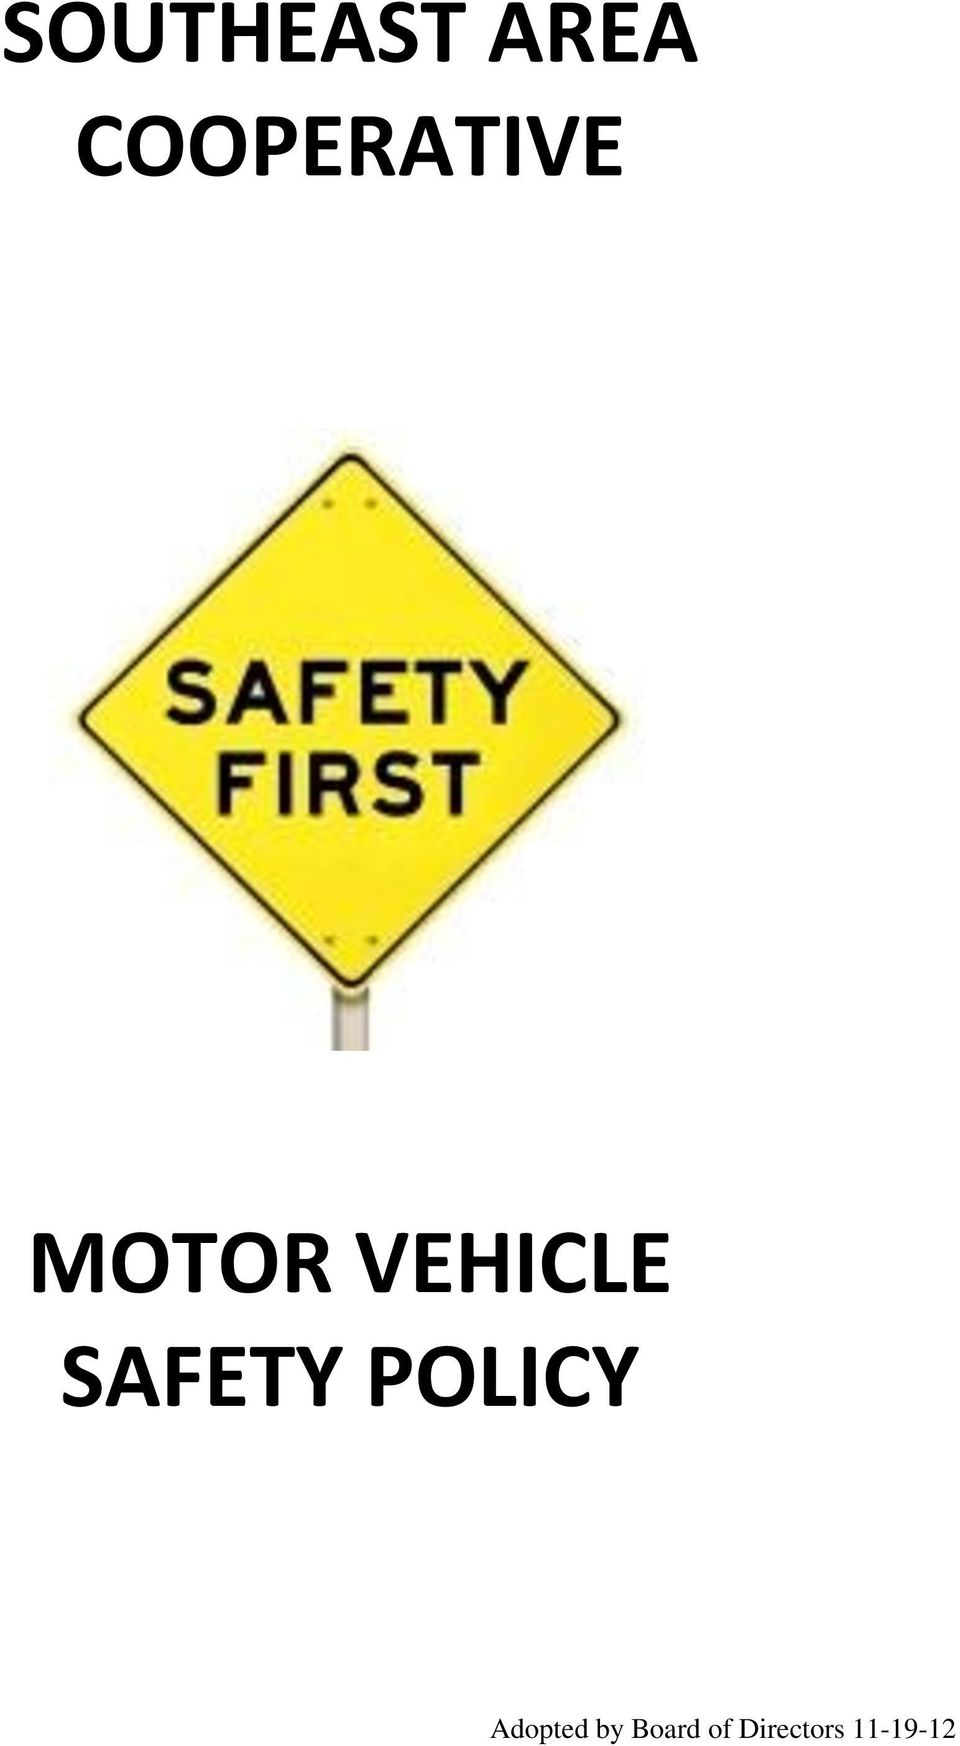 VEHICLE SAFETY POLICY